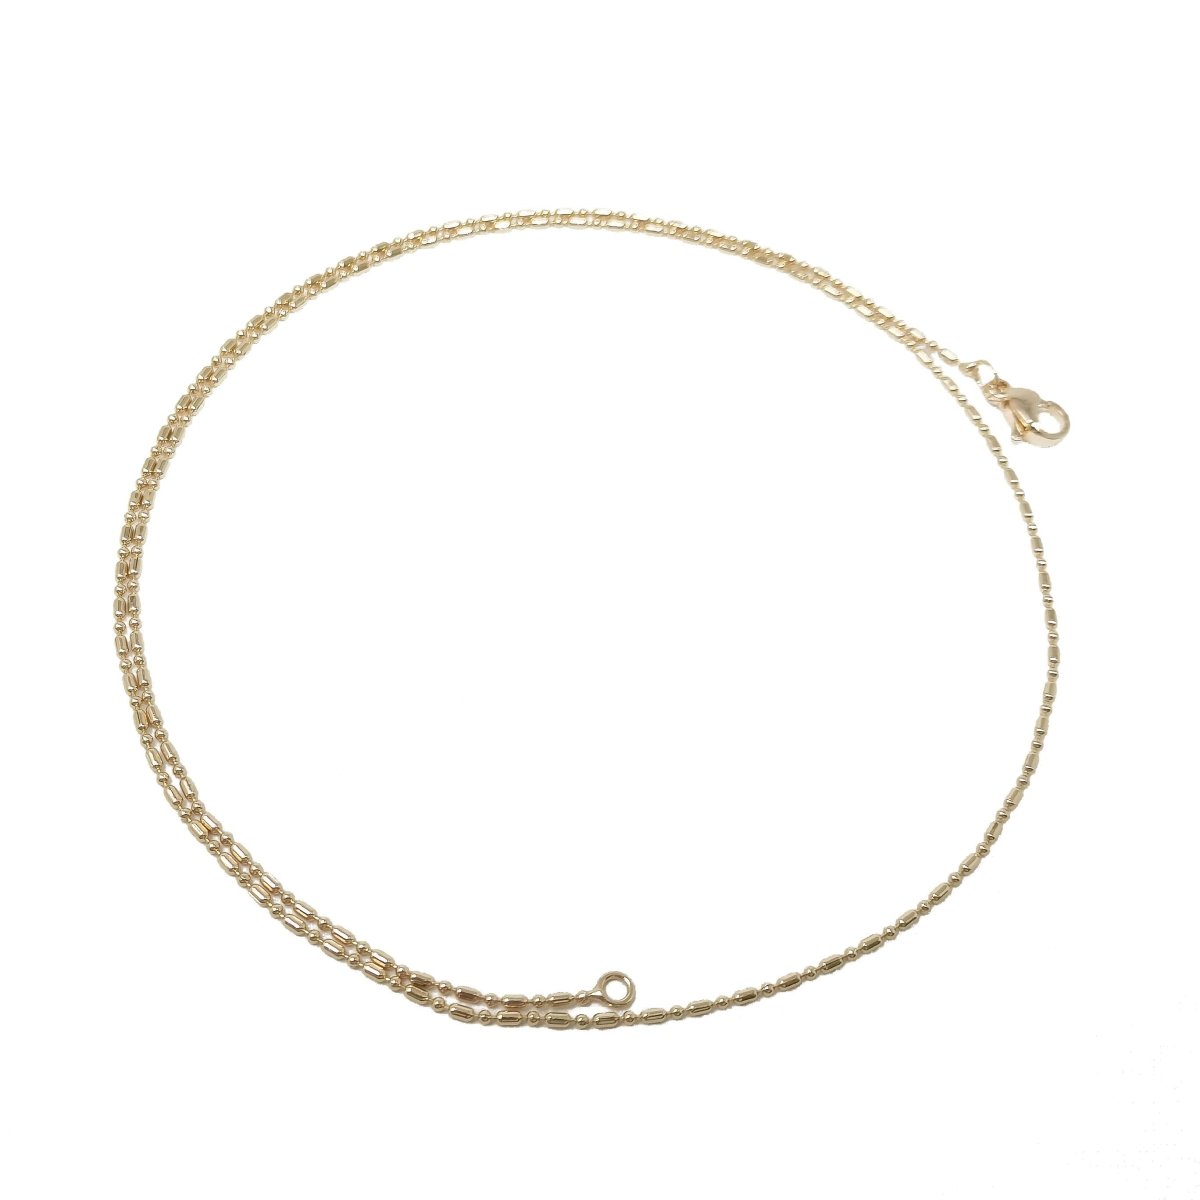 16, 17.8, 19.8 inches Gold Filled Bead Necklace - 1.2mm, 14K Gold Filled Bead Necklace w/ Lobster Clasps | CN-900, CN-901, CN-902 Clearance Pricing - DLUXCA